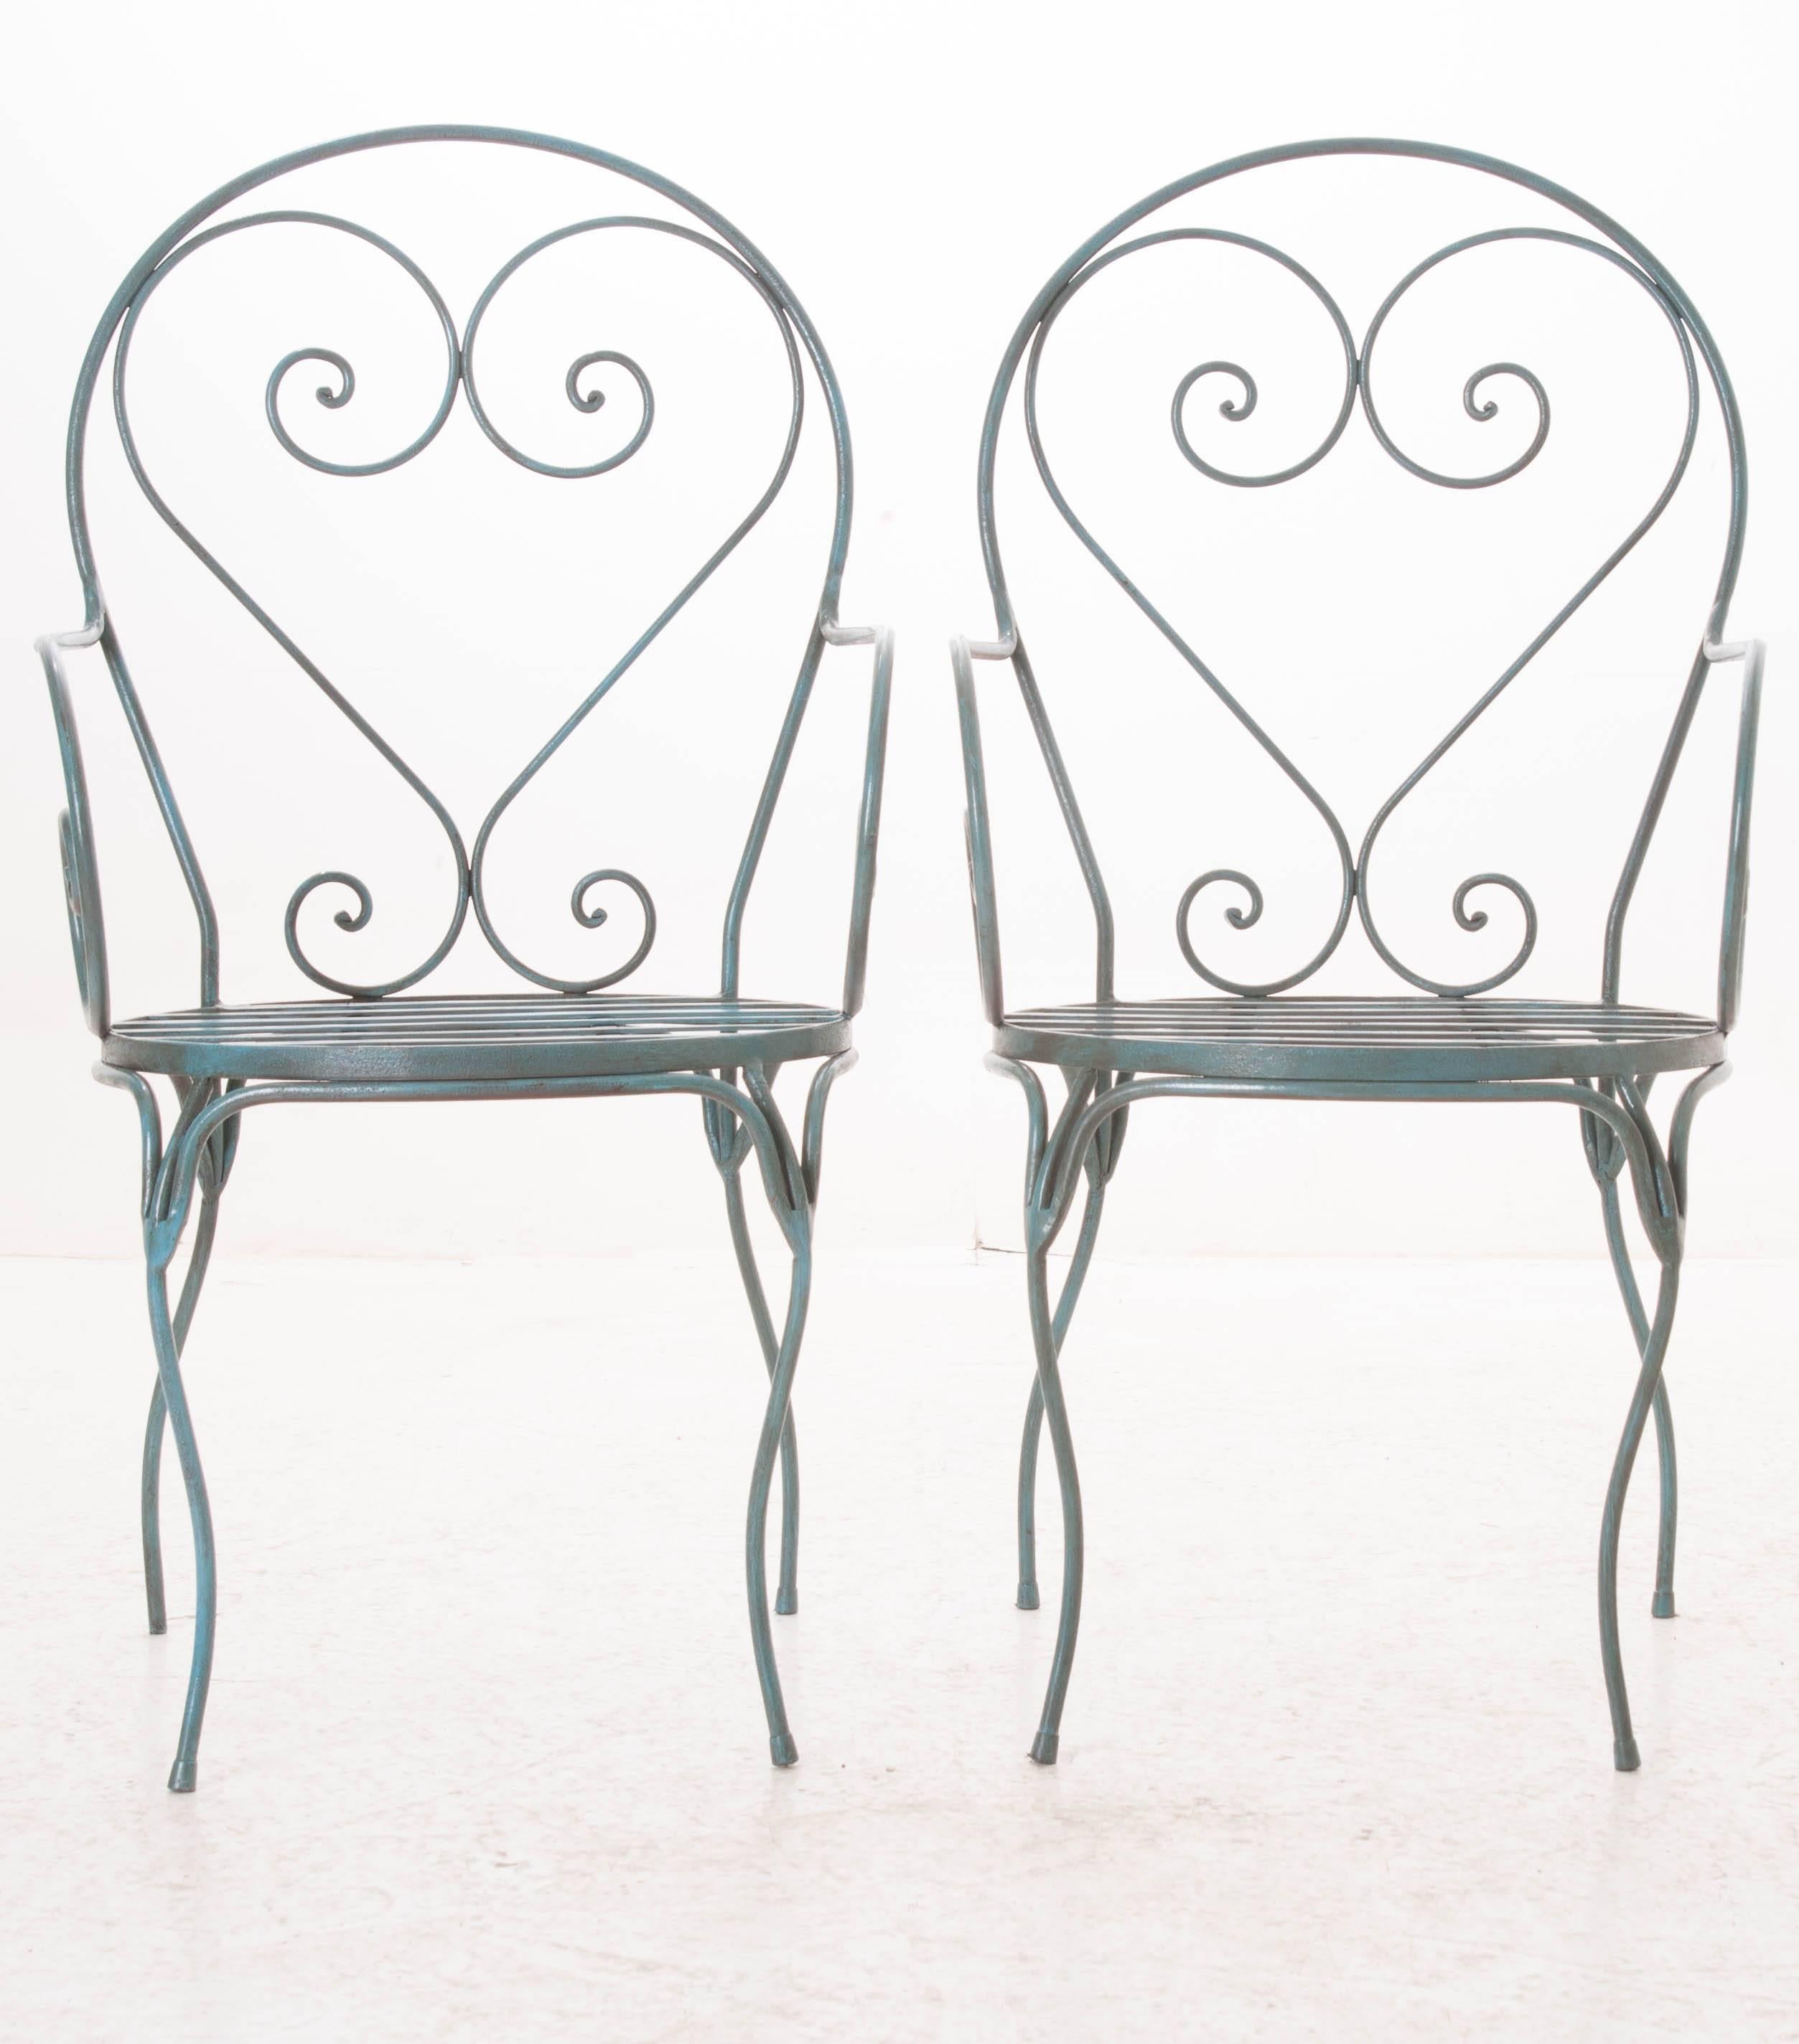 A sweet pair of vintage French metal chairs with a beautifully scrolled ironwork frame that has been painted an extraordinary shade of blue. These metal chairs could be used both indoors and out, providing a pop of color wherever they go!
 